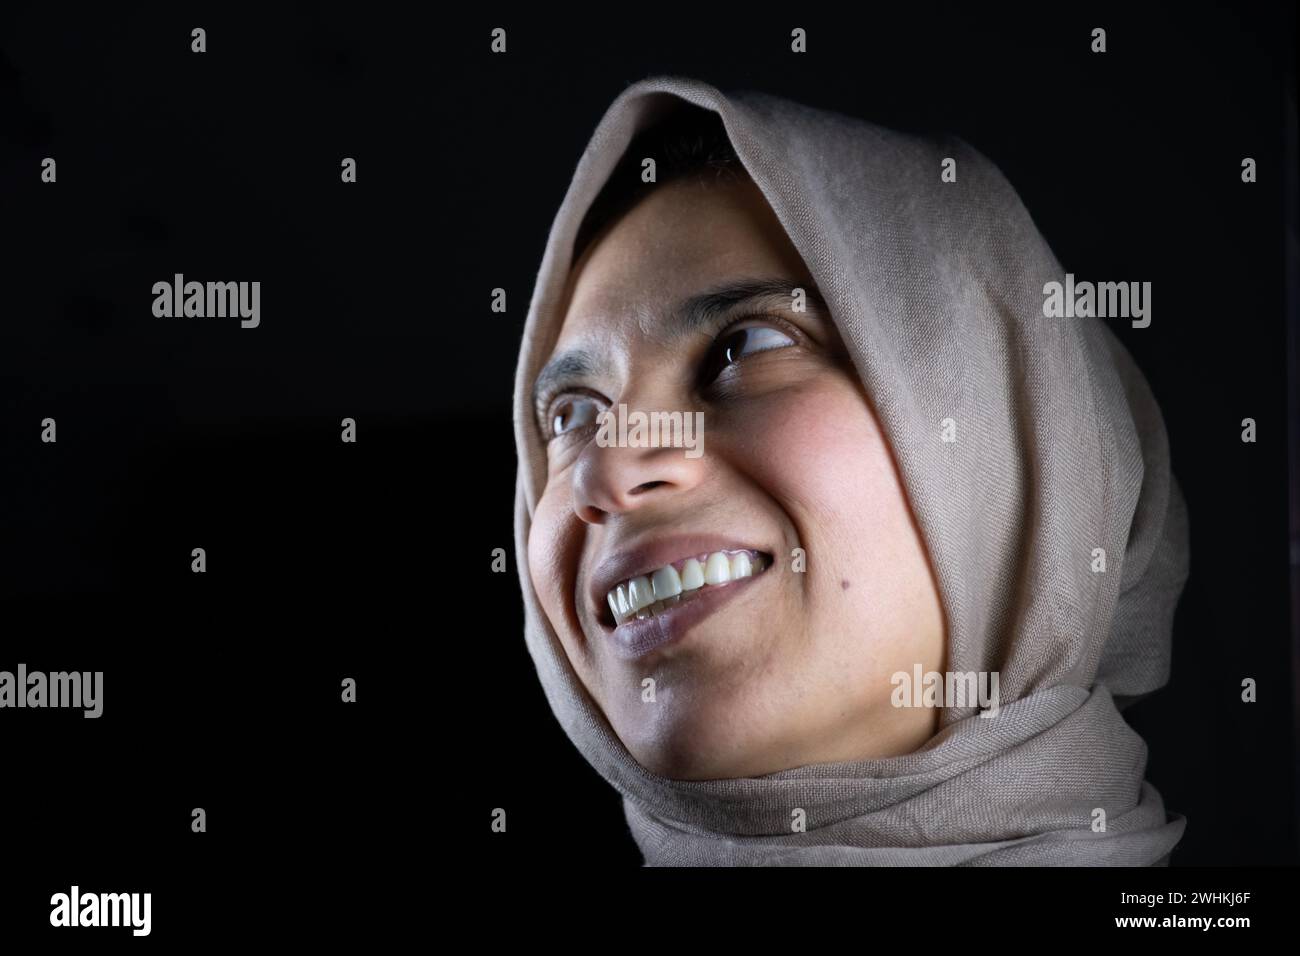 portrait for muslim women on black background in studio with facial expressions Stock Photo